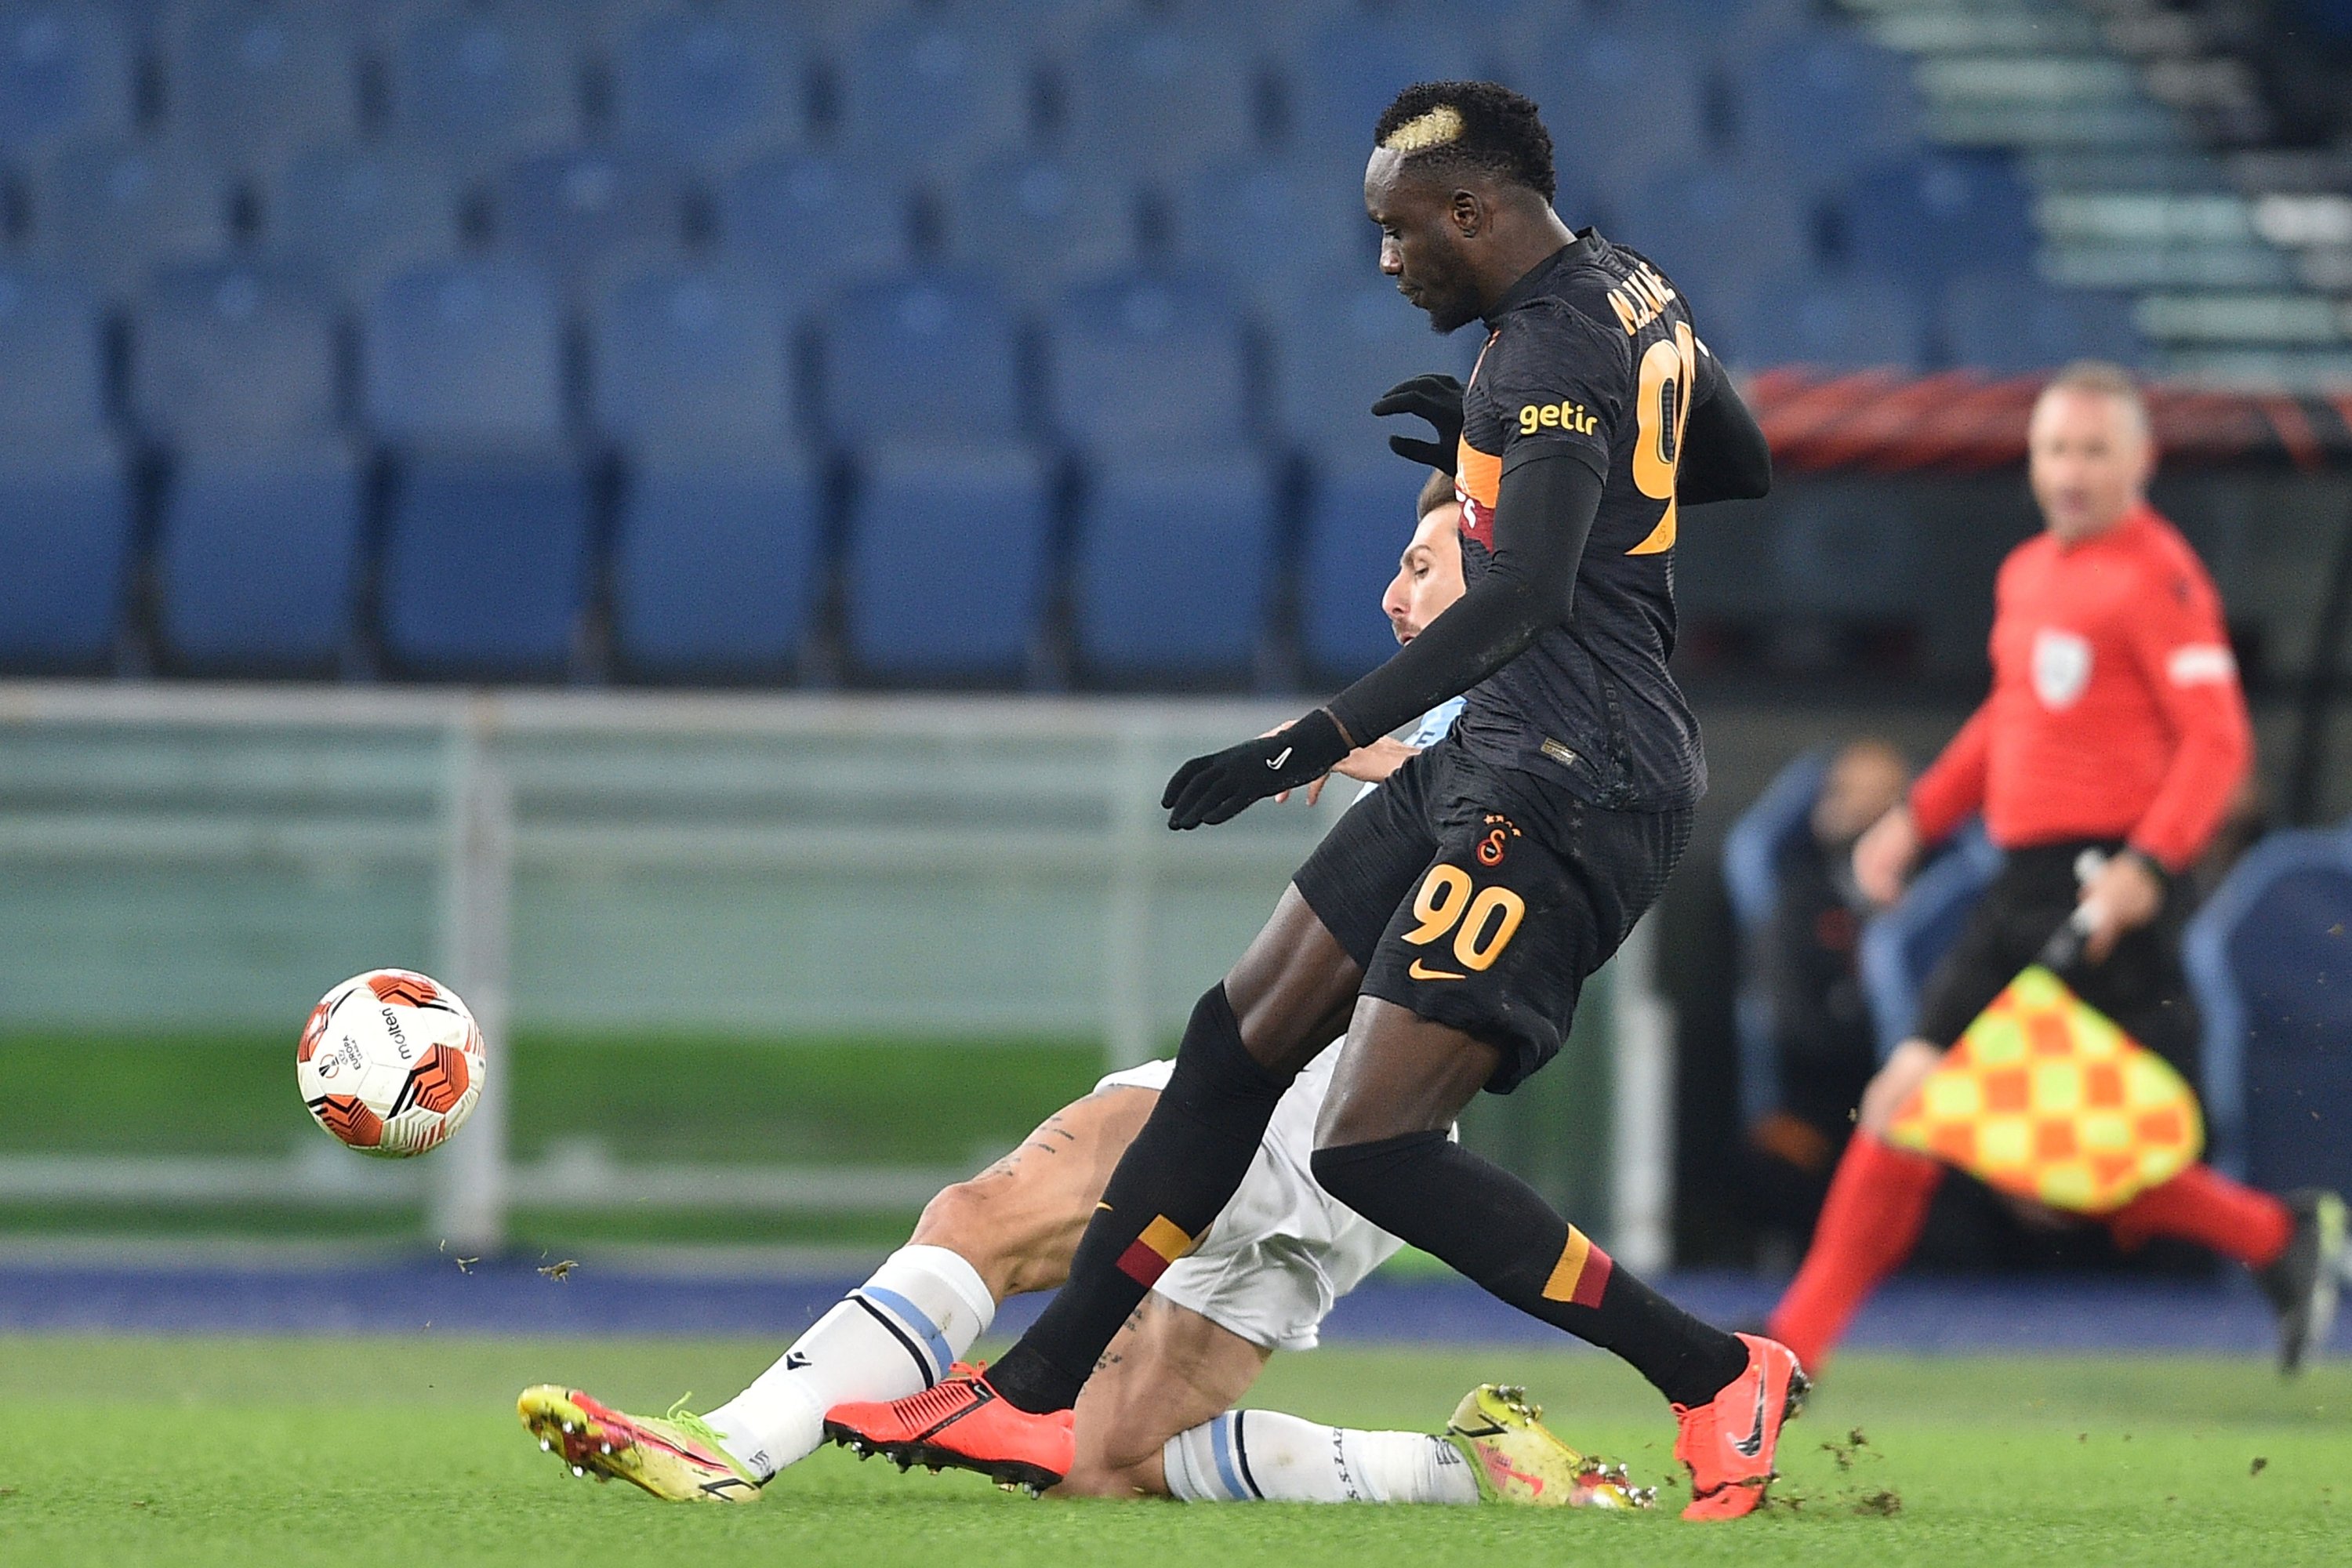 Galatasaray's Mbaye Diagne is seen in action during the UEFA Europa League Group E match between Lazio and Galatasaray at the Stadio Olimpico in Rome, Italy on Dec. 9, 2021 (AA Photo)